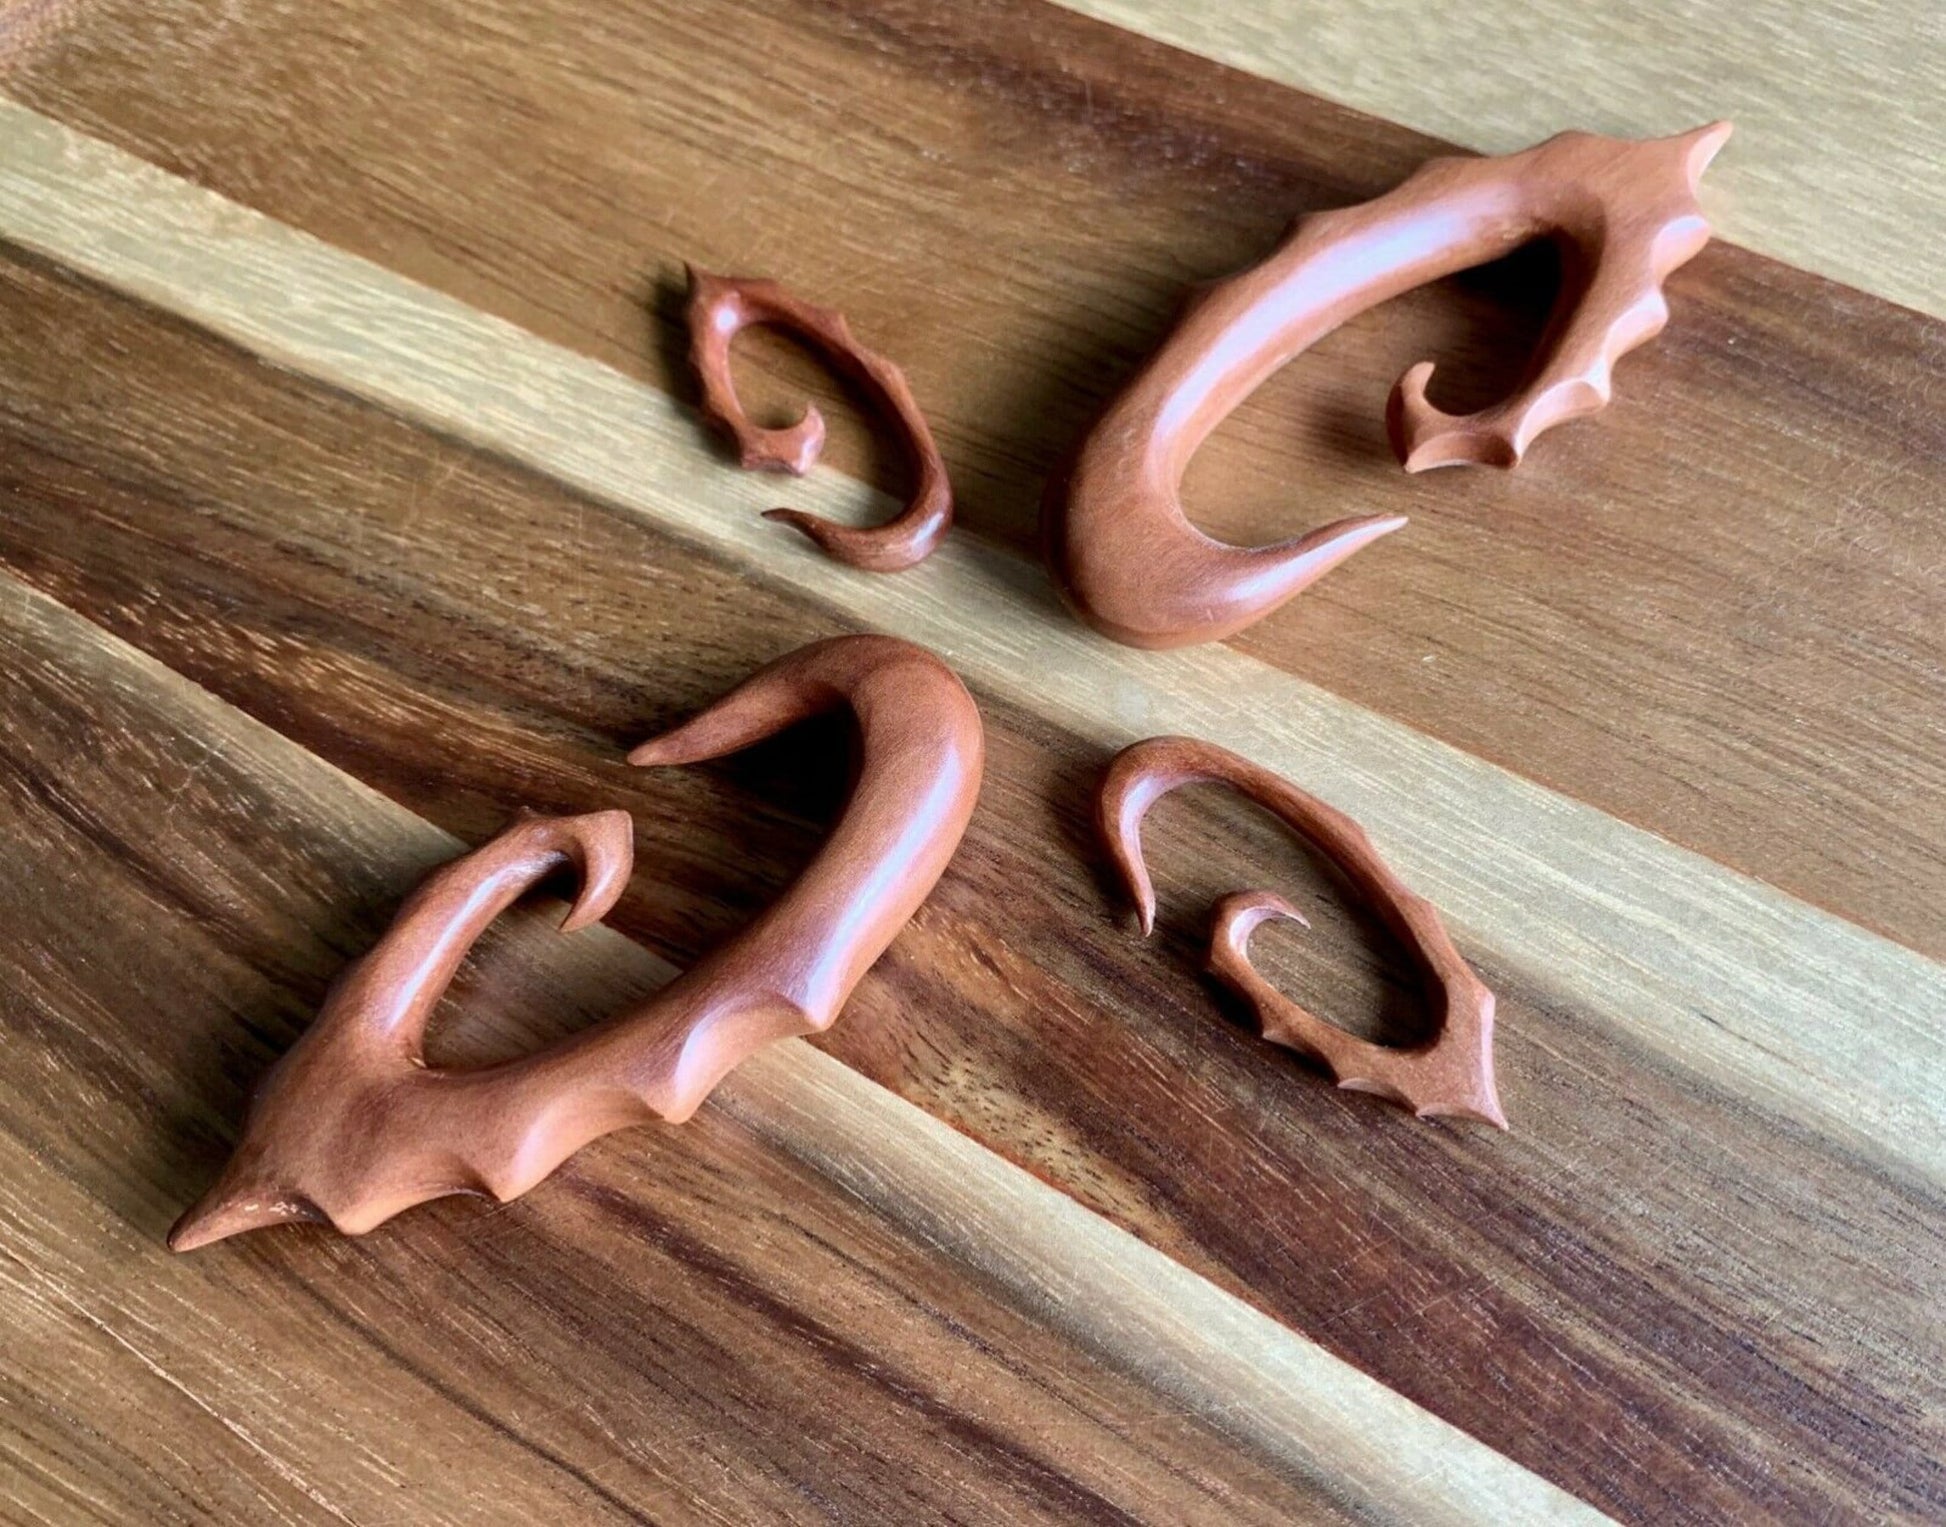 PAIR of Unique Organic Sawo Wood Spiral Tapers Hangers - Gauges 6g (4mm) up to 0000g (12mm) available!